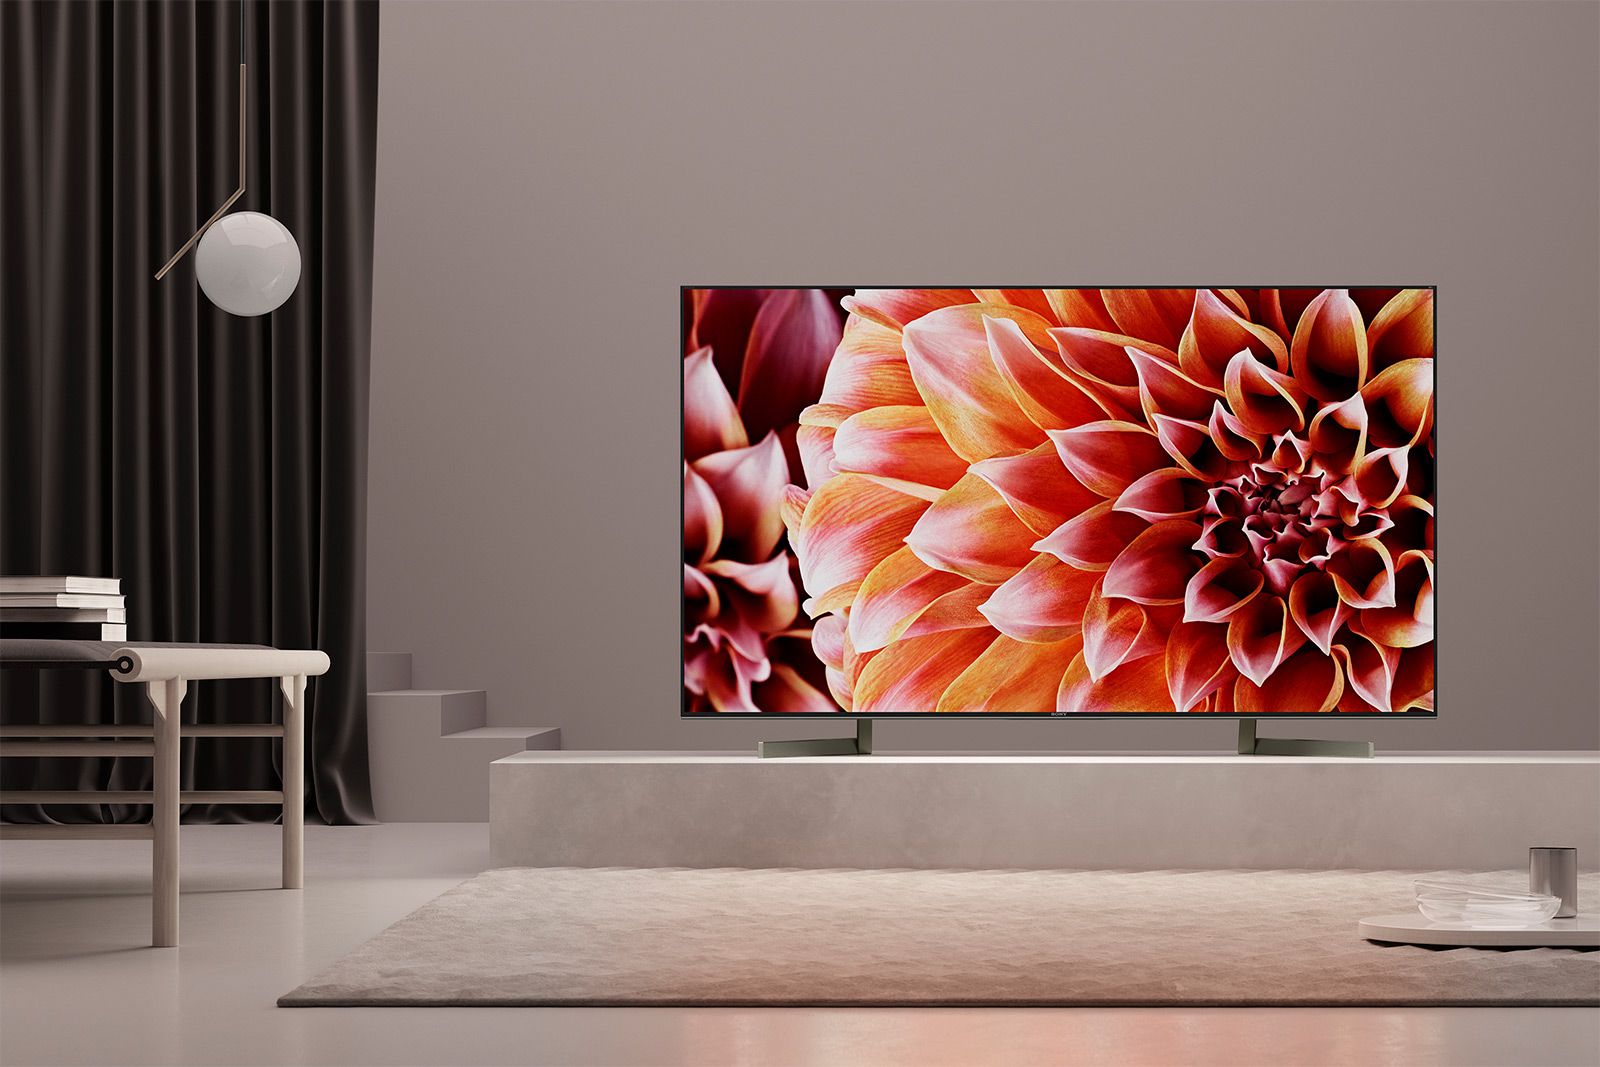 Sony announces XF range of 4K HDR TVs including XF90 flagship with Dolby Vision image 1